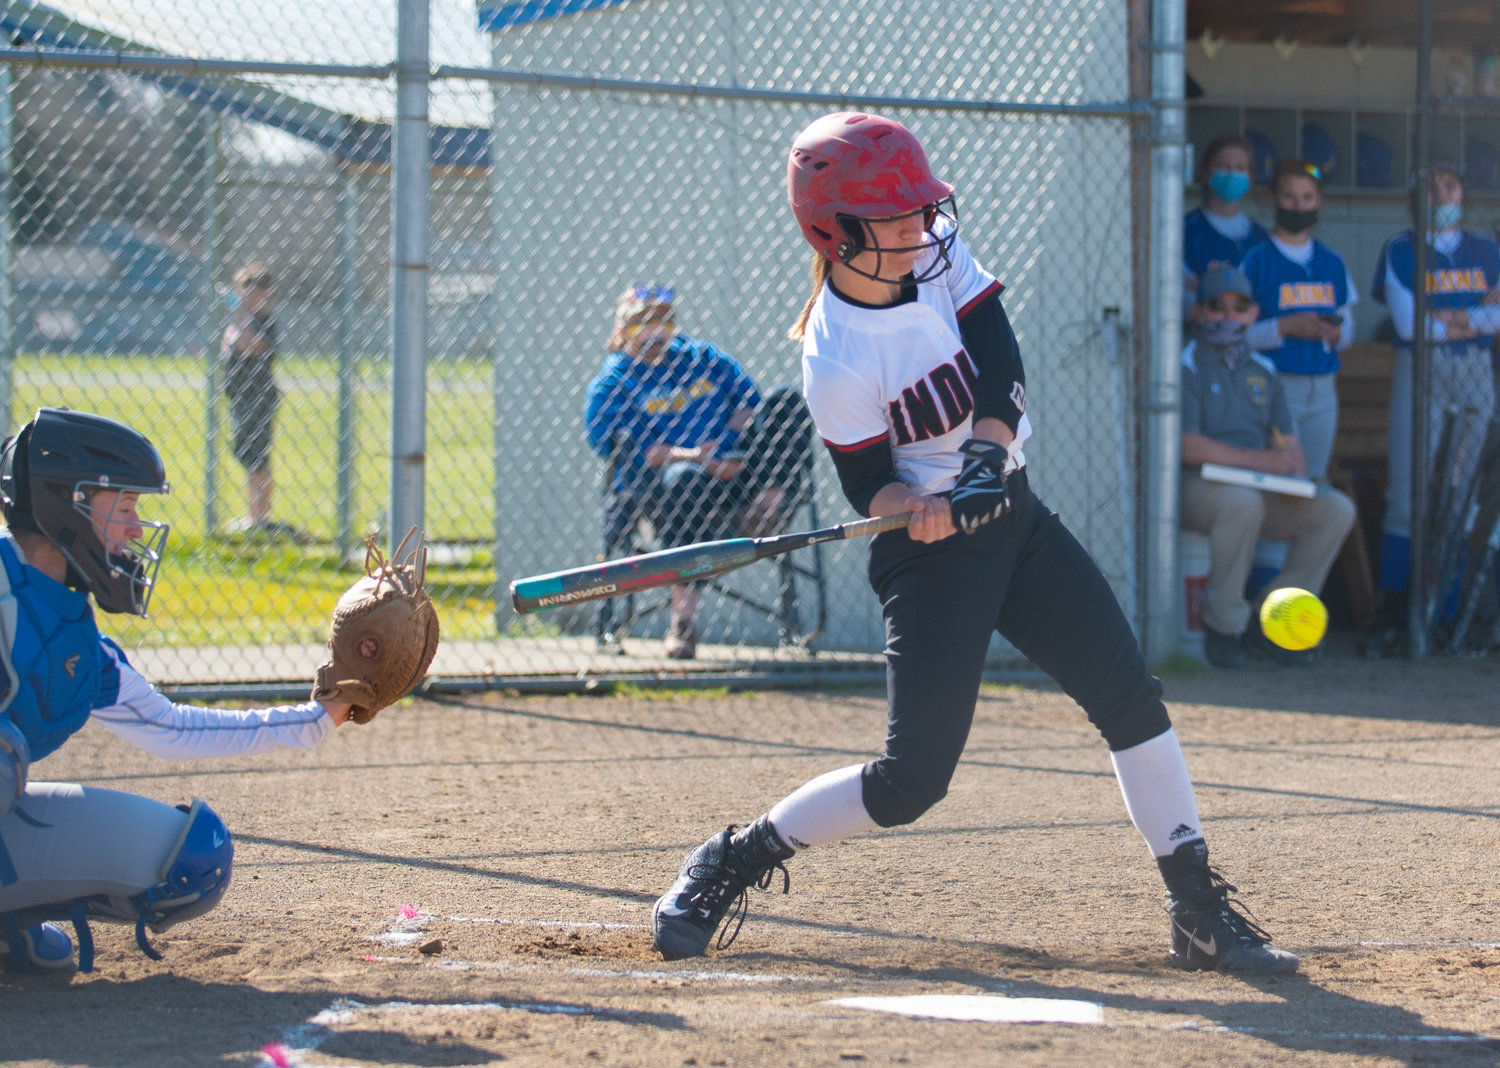 Toledo's Quyn Norberg swings at an Adna pitch on Monday.